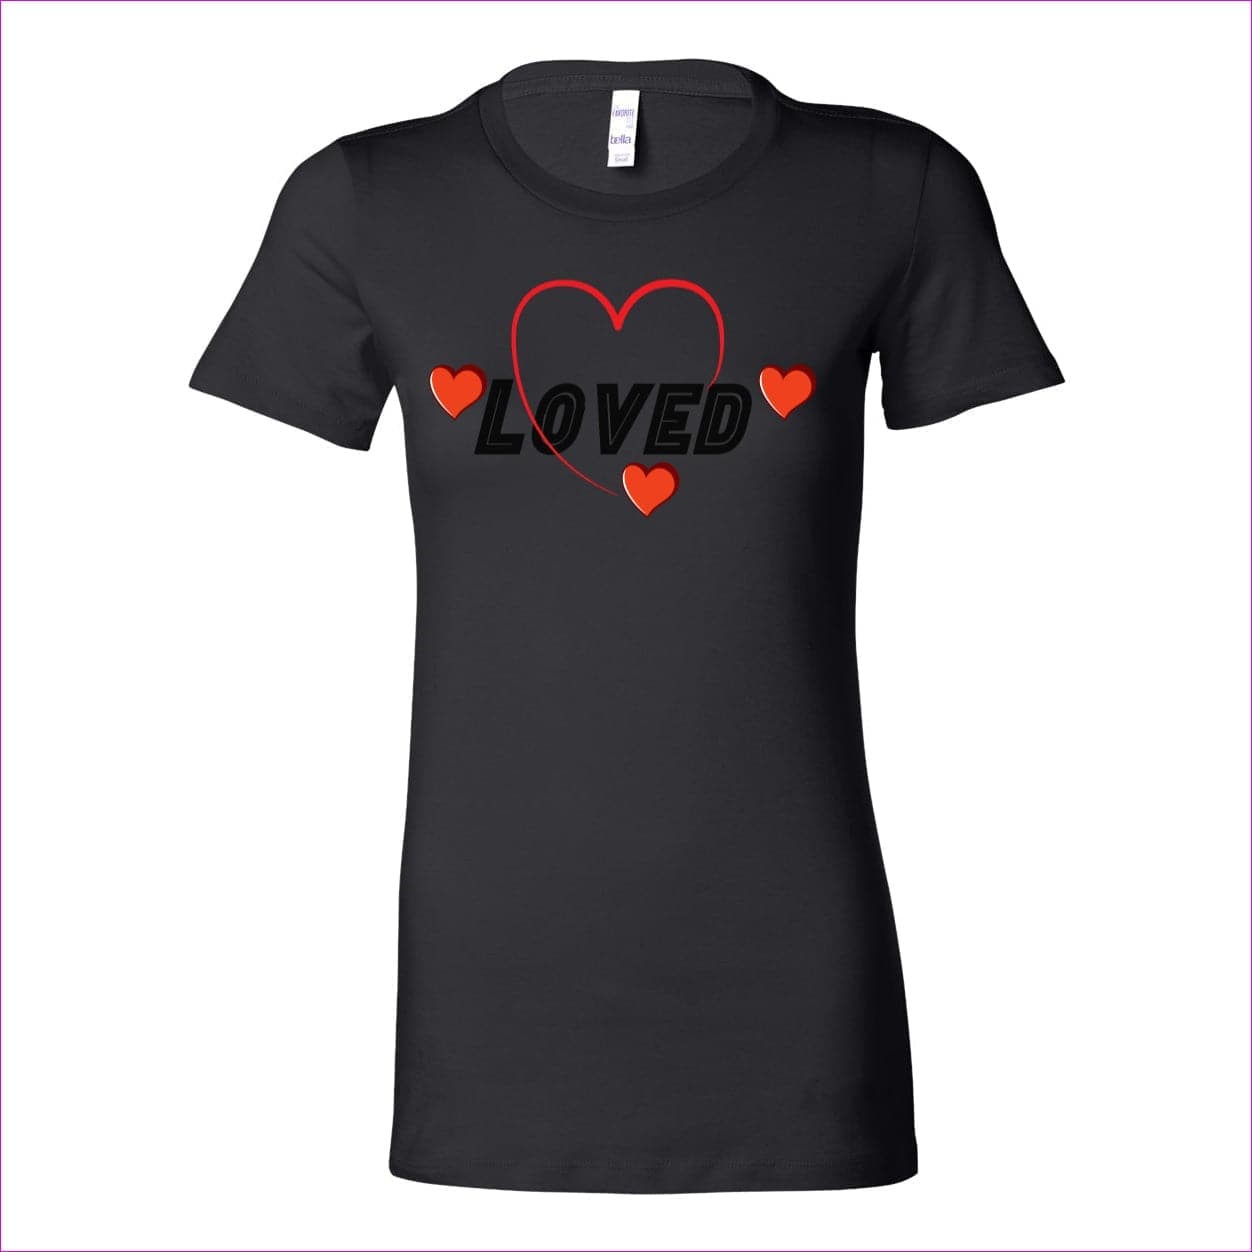 Black Loved Womens Favorite Tee - women's t-shirt at TFC&H Co.